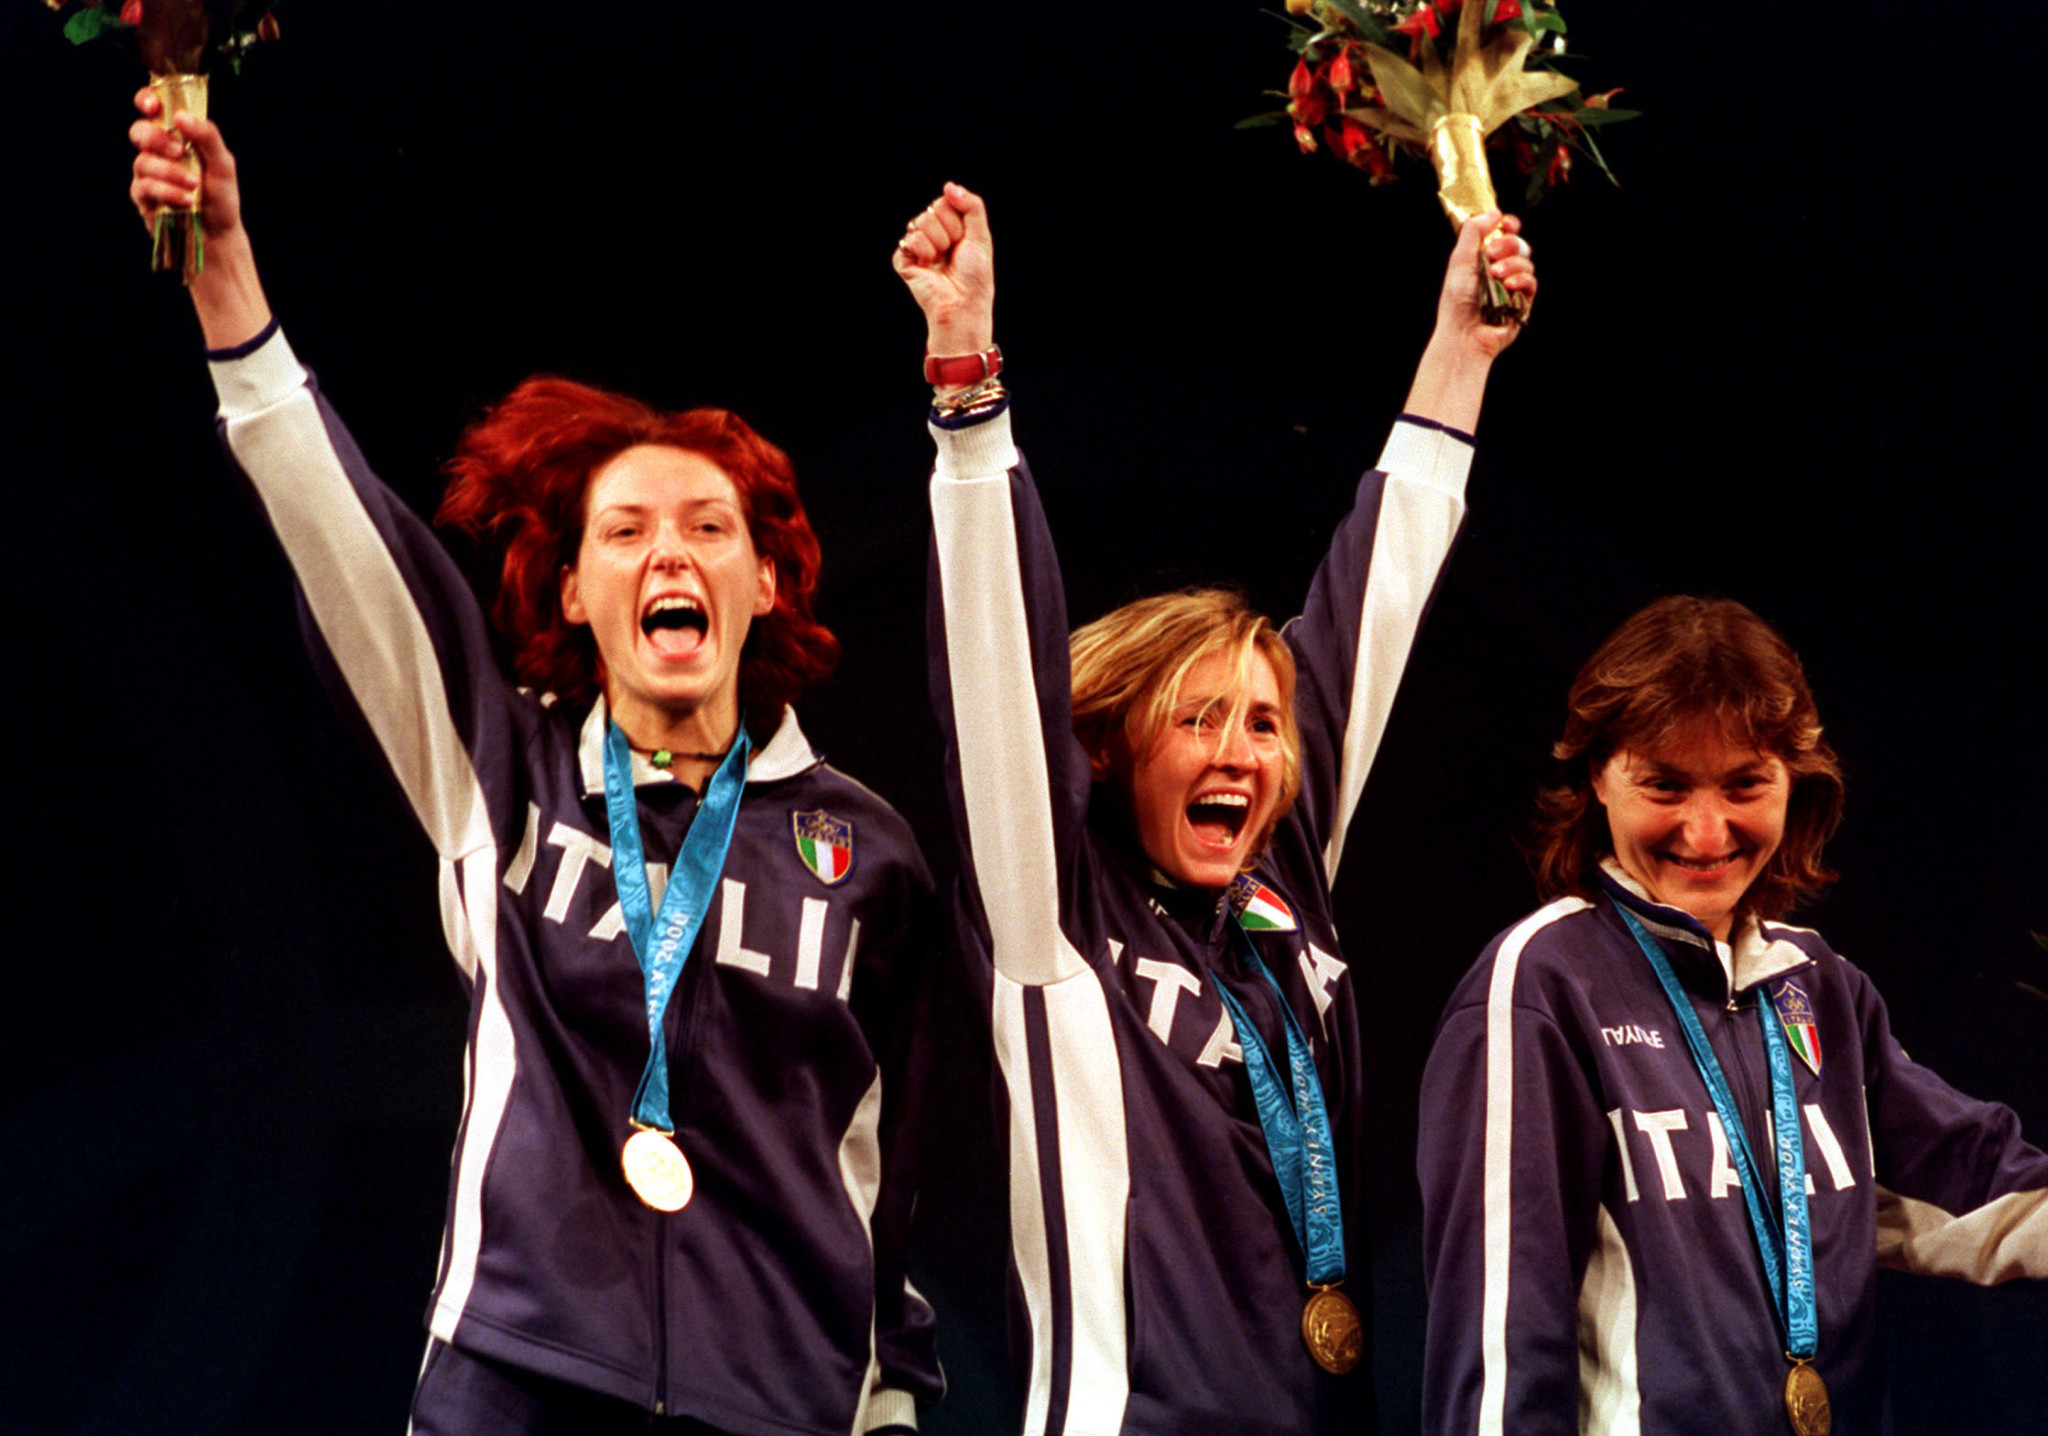 Diana Bianchedi, centre, won the second of her two Olympic women's team foil gold medals at Sydney 2000 ©Getty Images